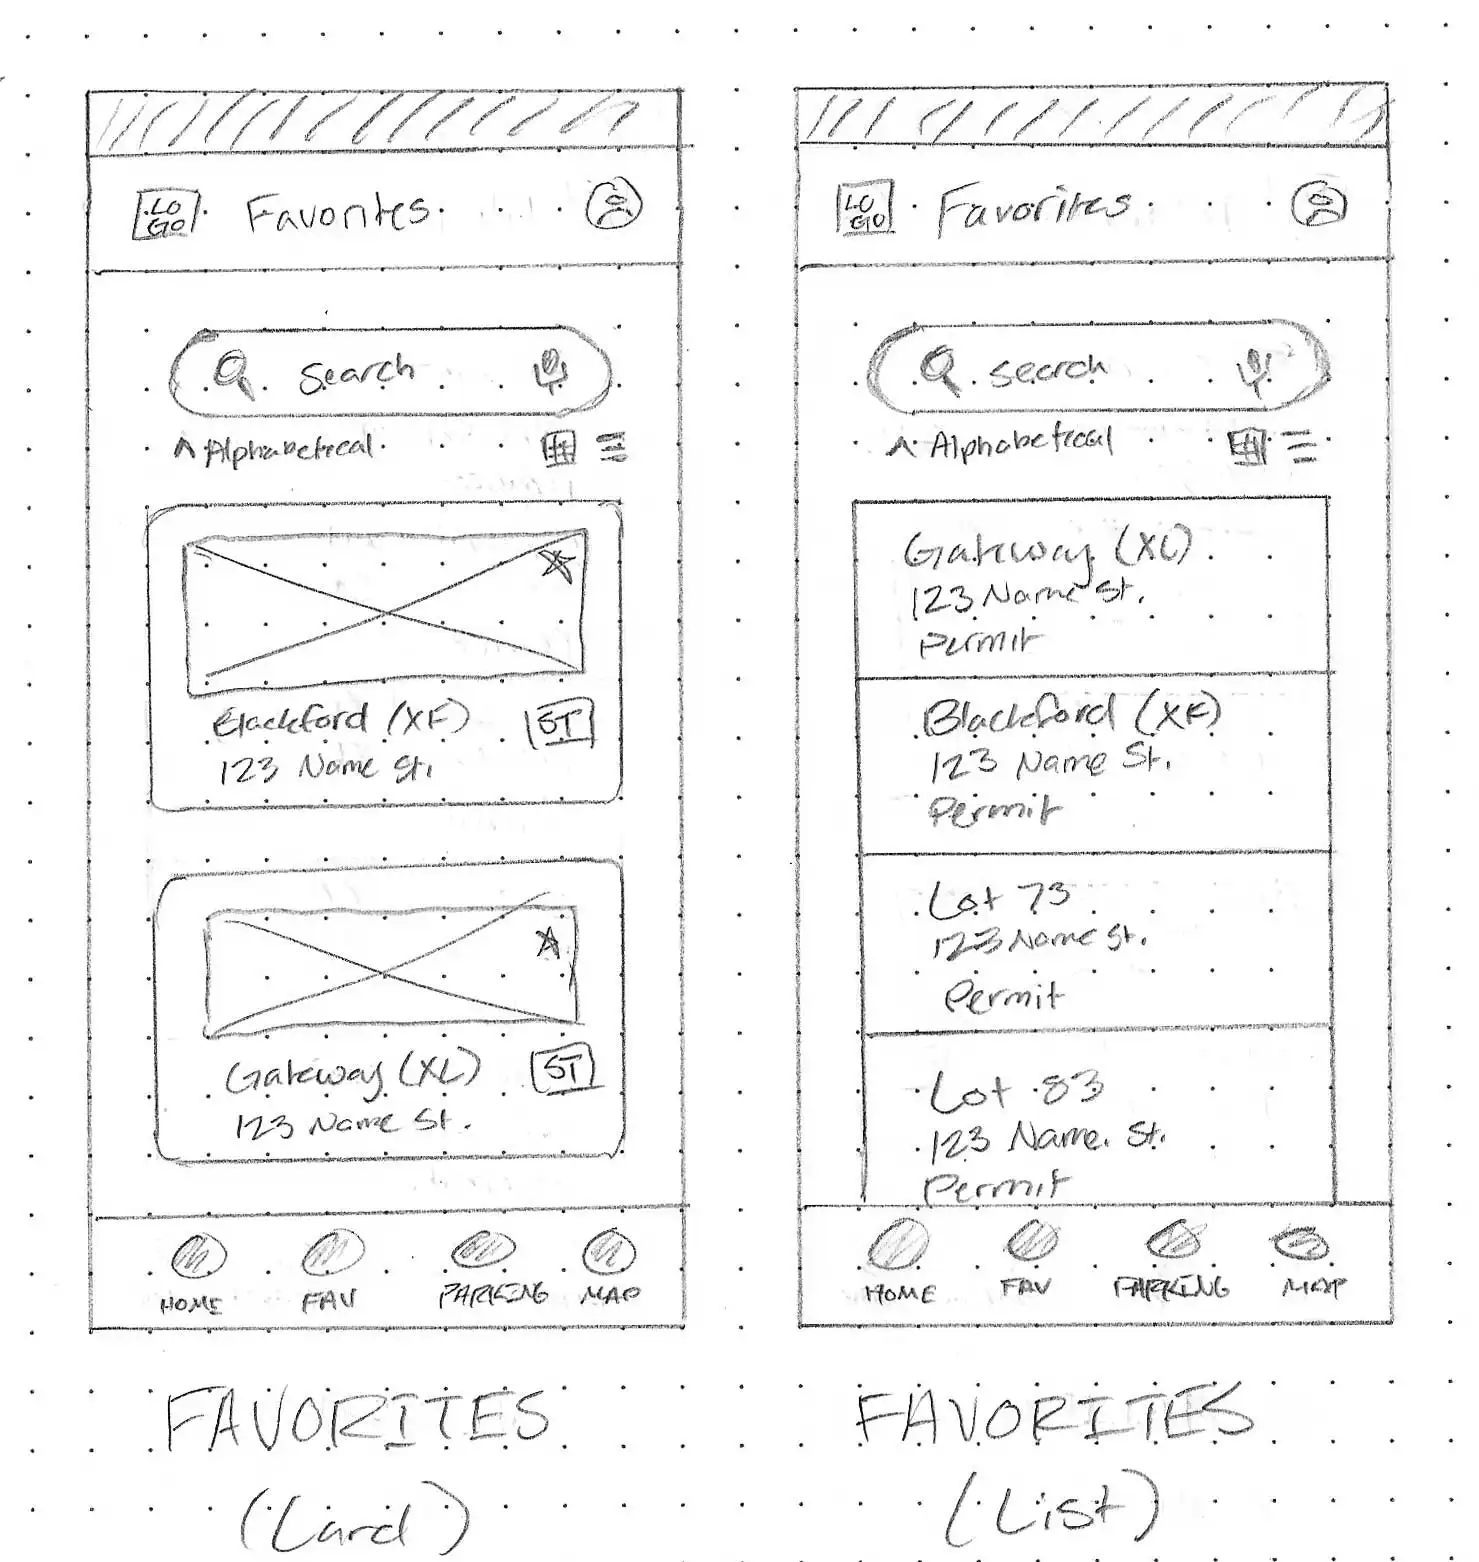 Picture of a hand-drawn diagram of a user interface